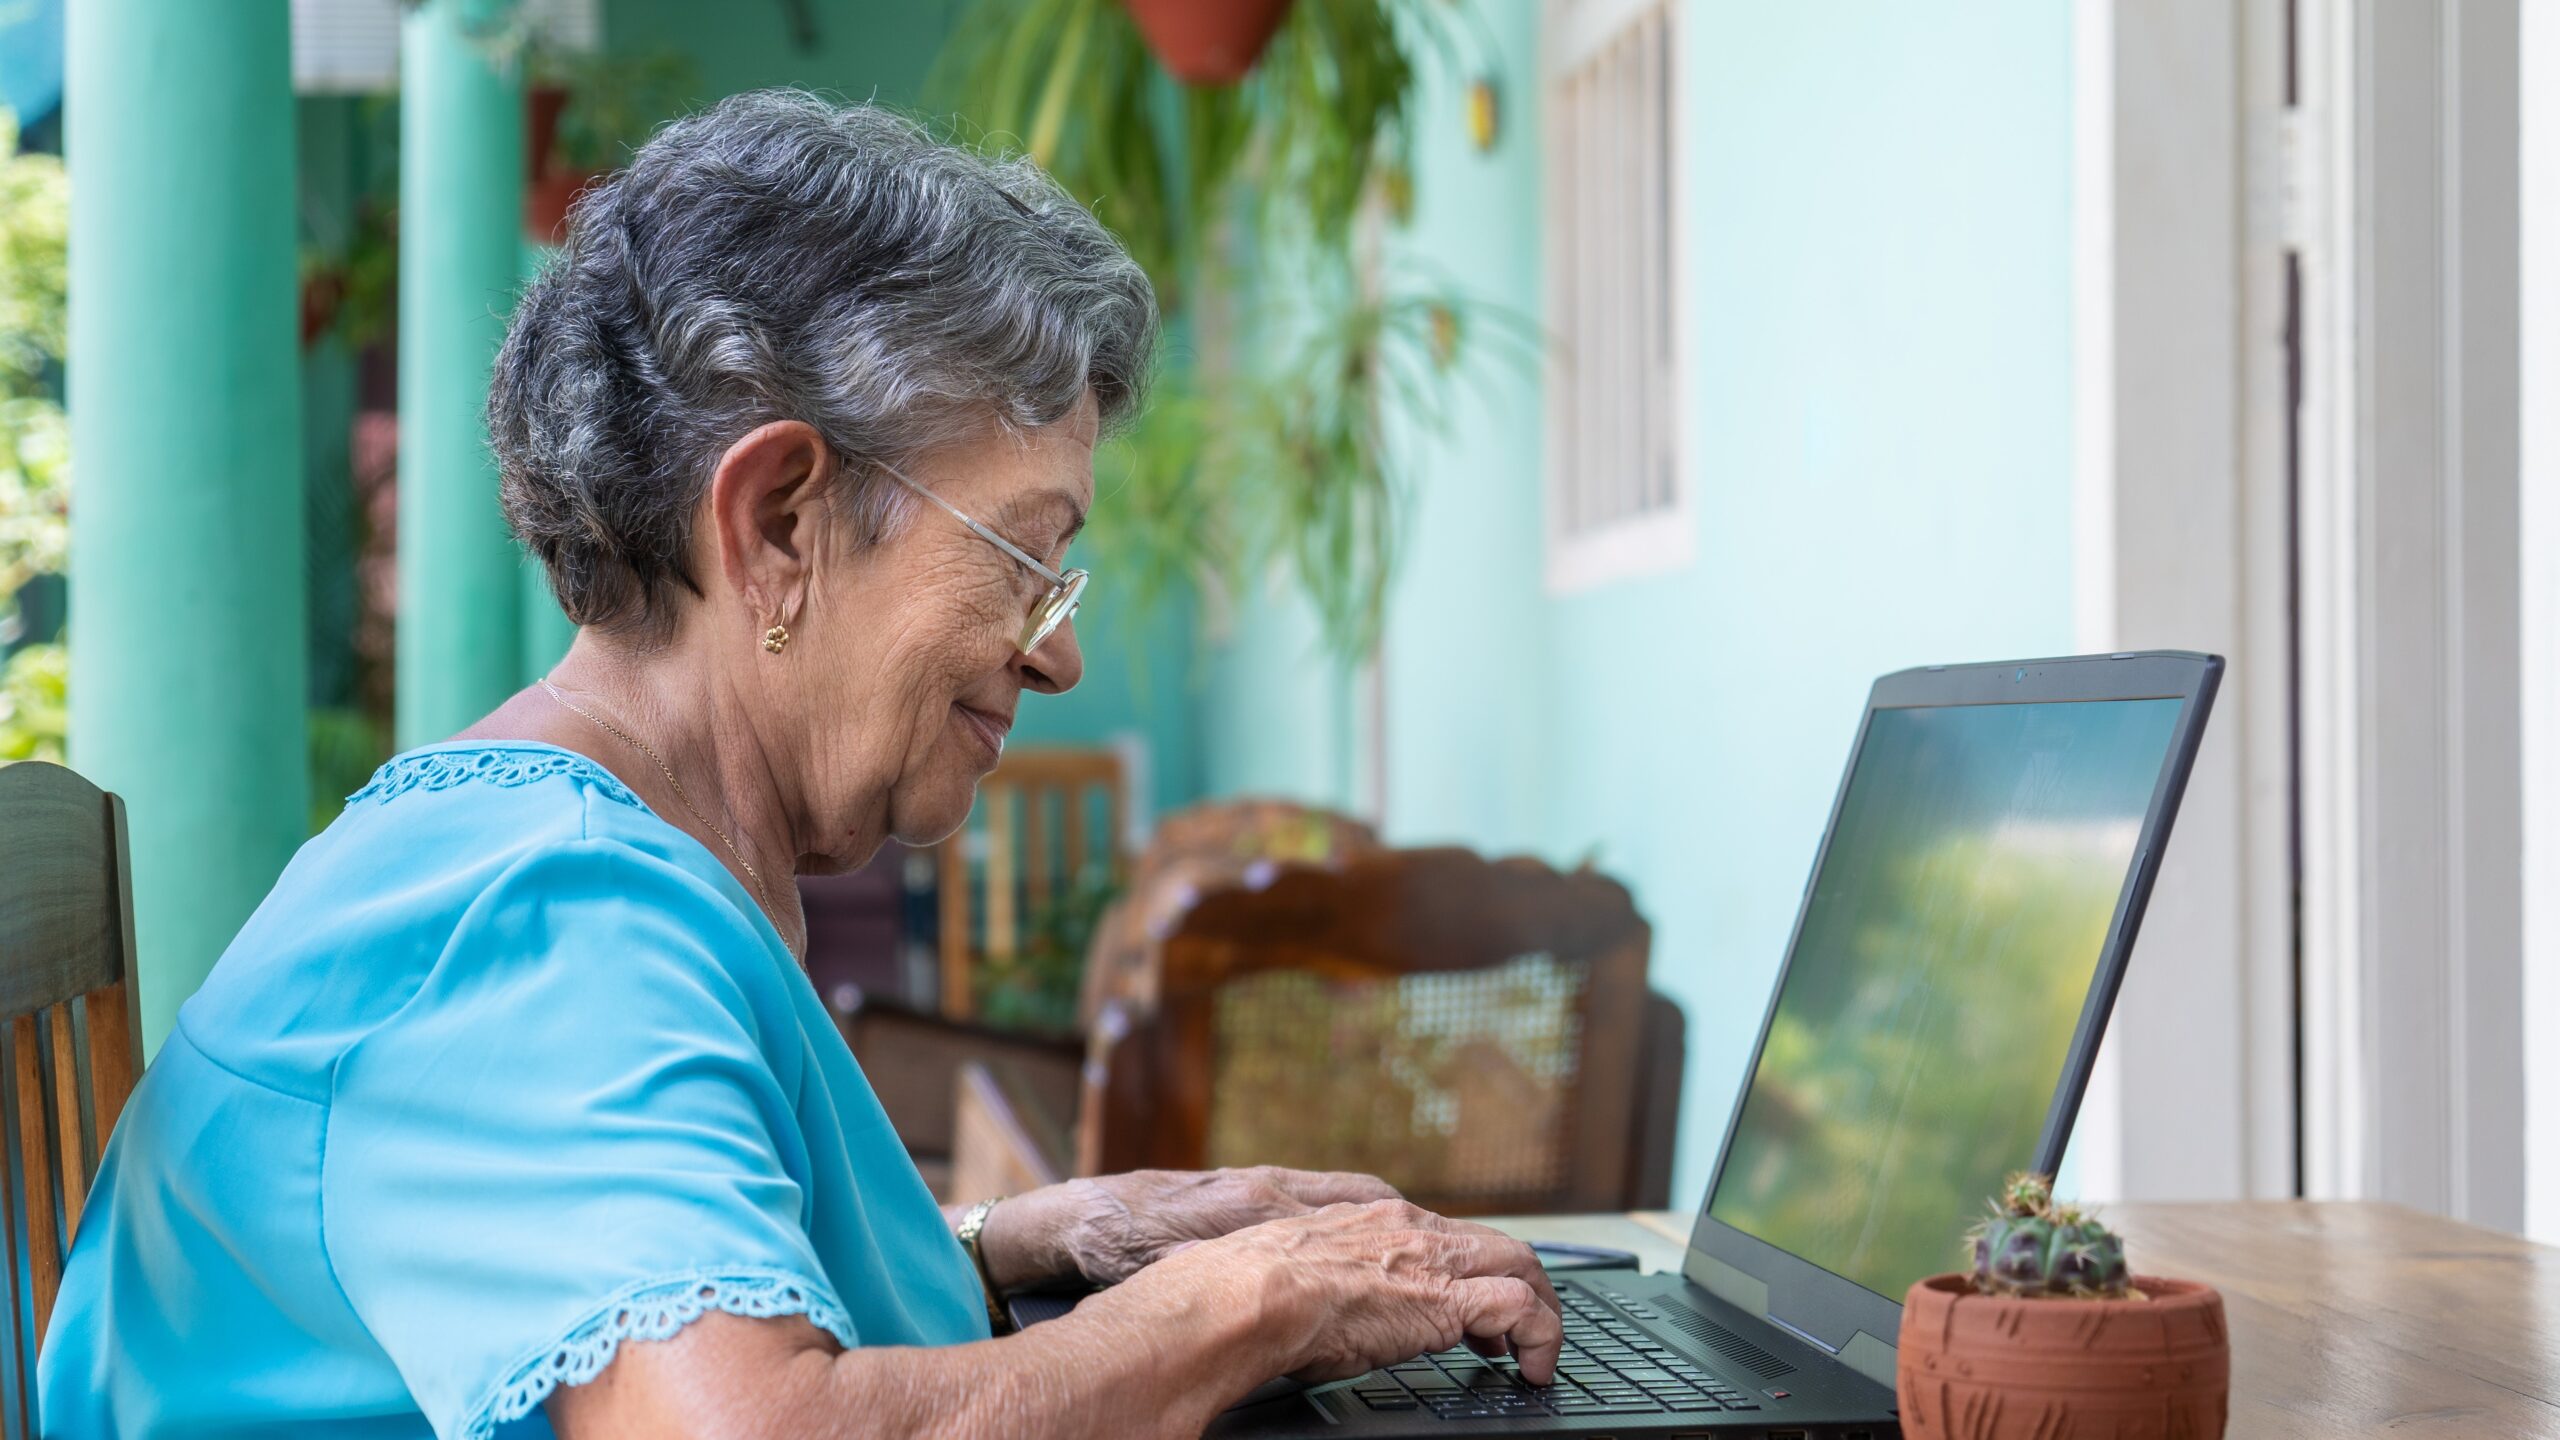 Smiling Elderly Woman Wearing Glasses With a Laptop